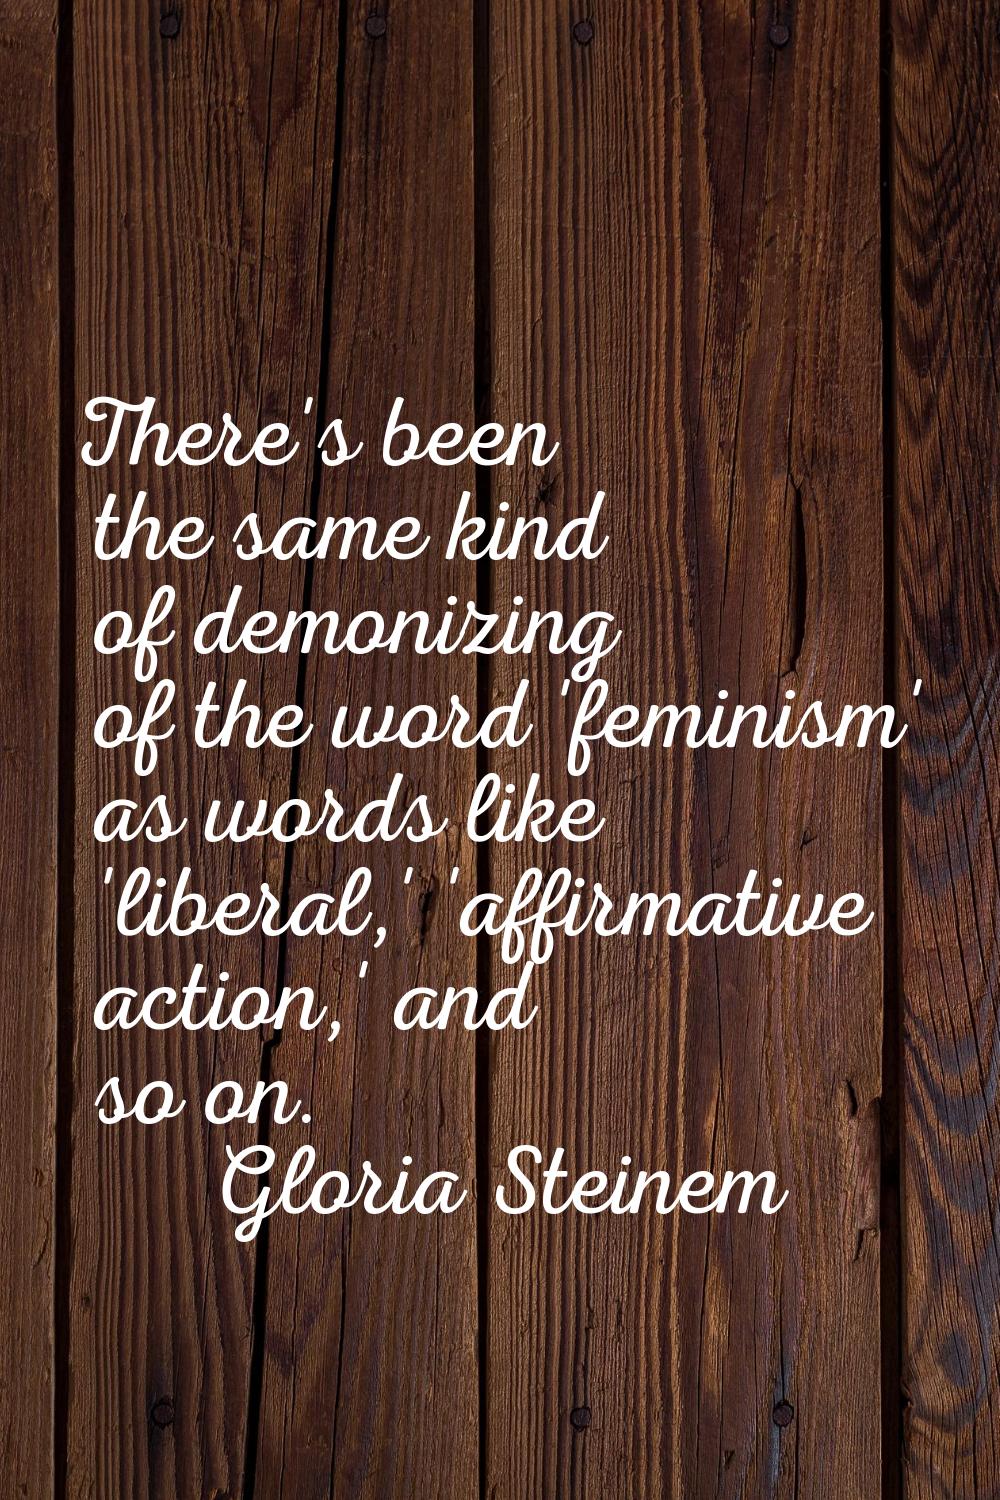 There's been the same kind of demonizing of the word 'feminism' as words like 'liberal,' 'affirmati